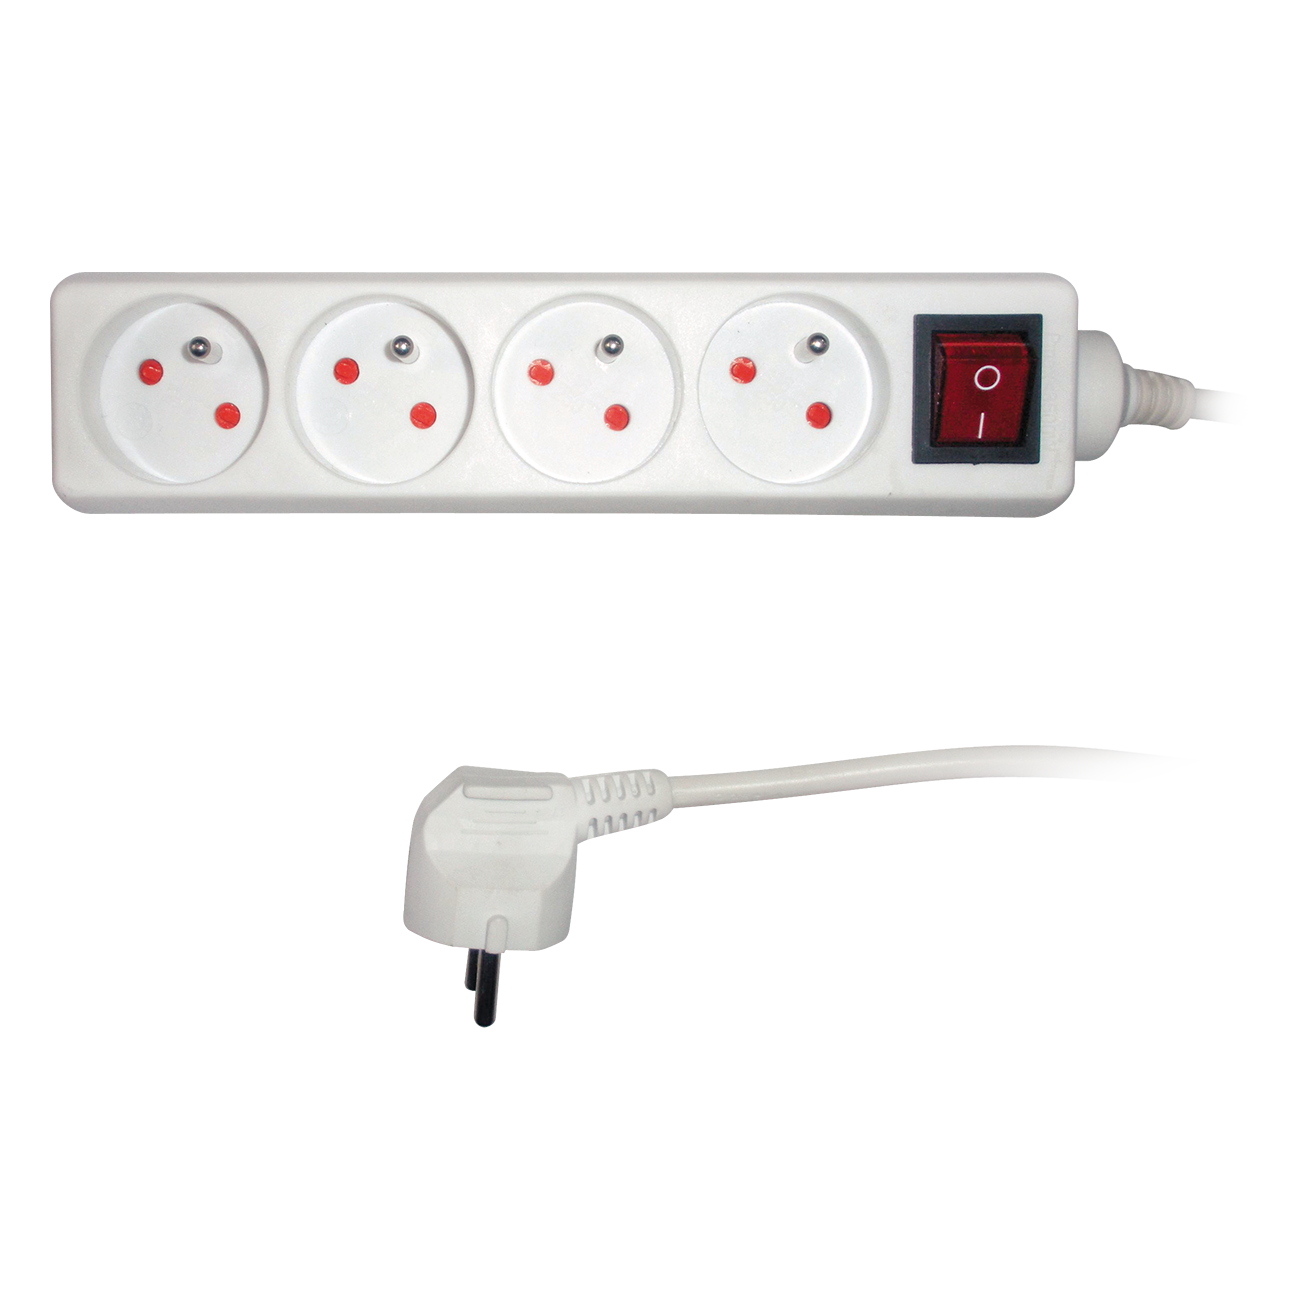 SPC - 4 Outlets with switch Power Extension Cord